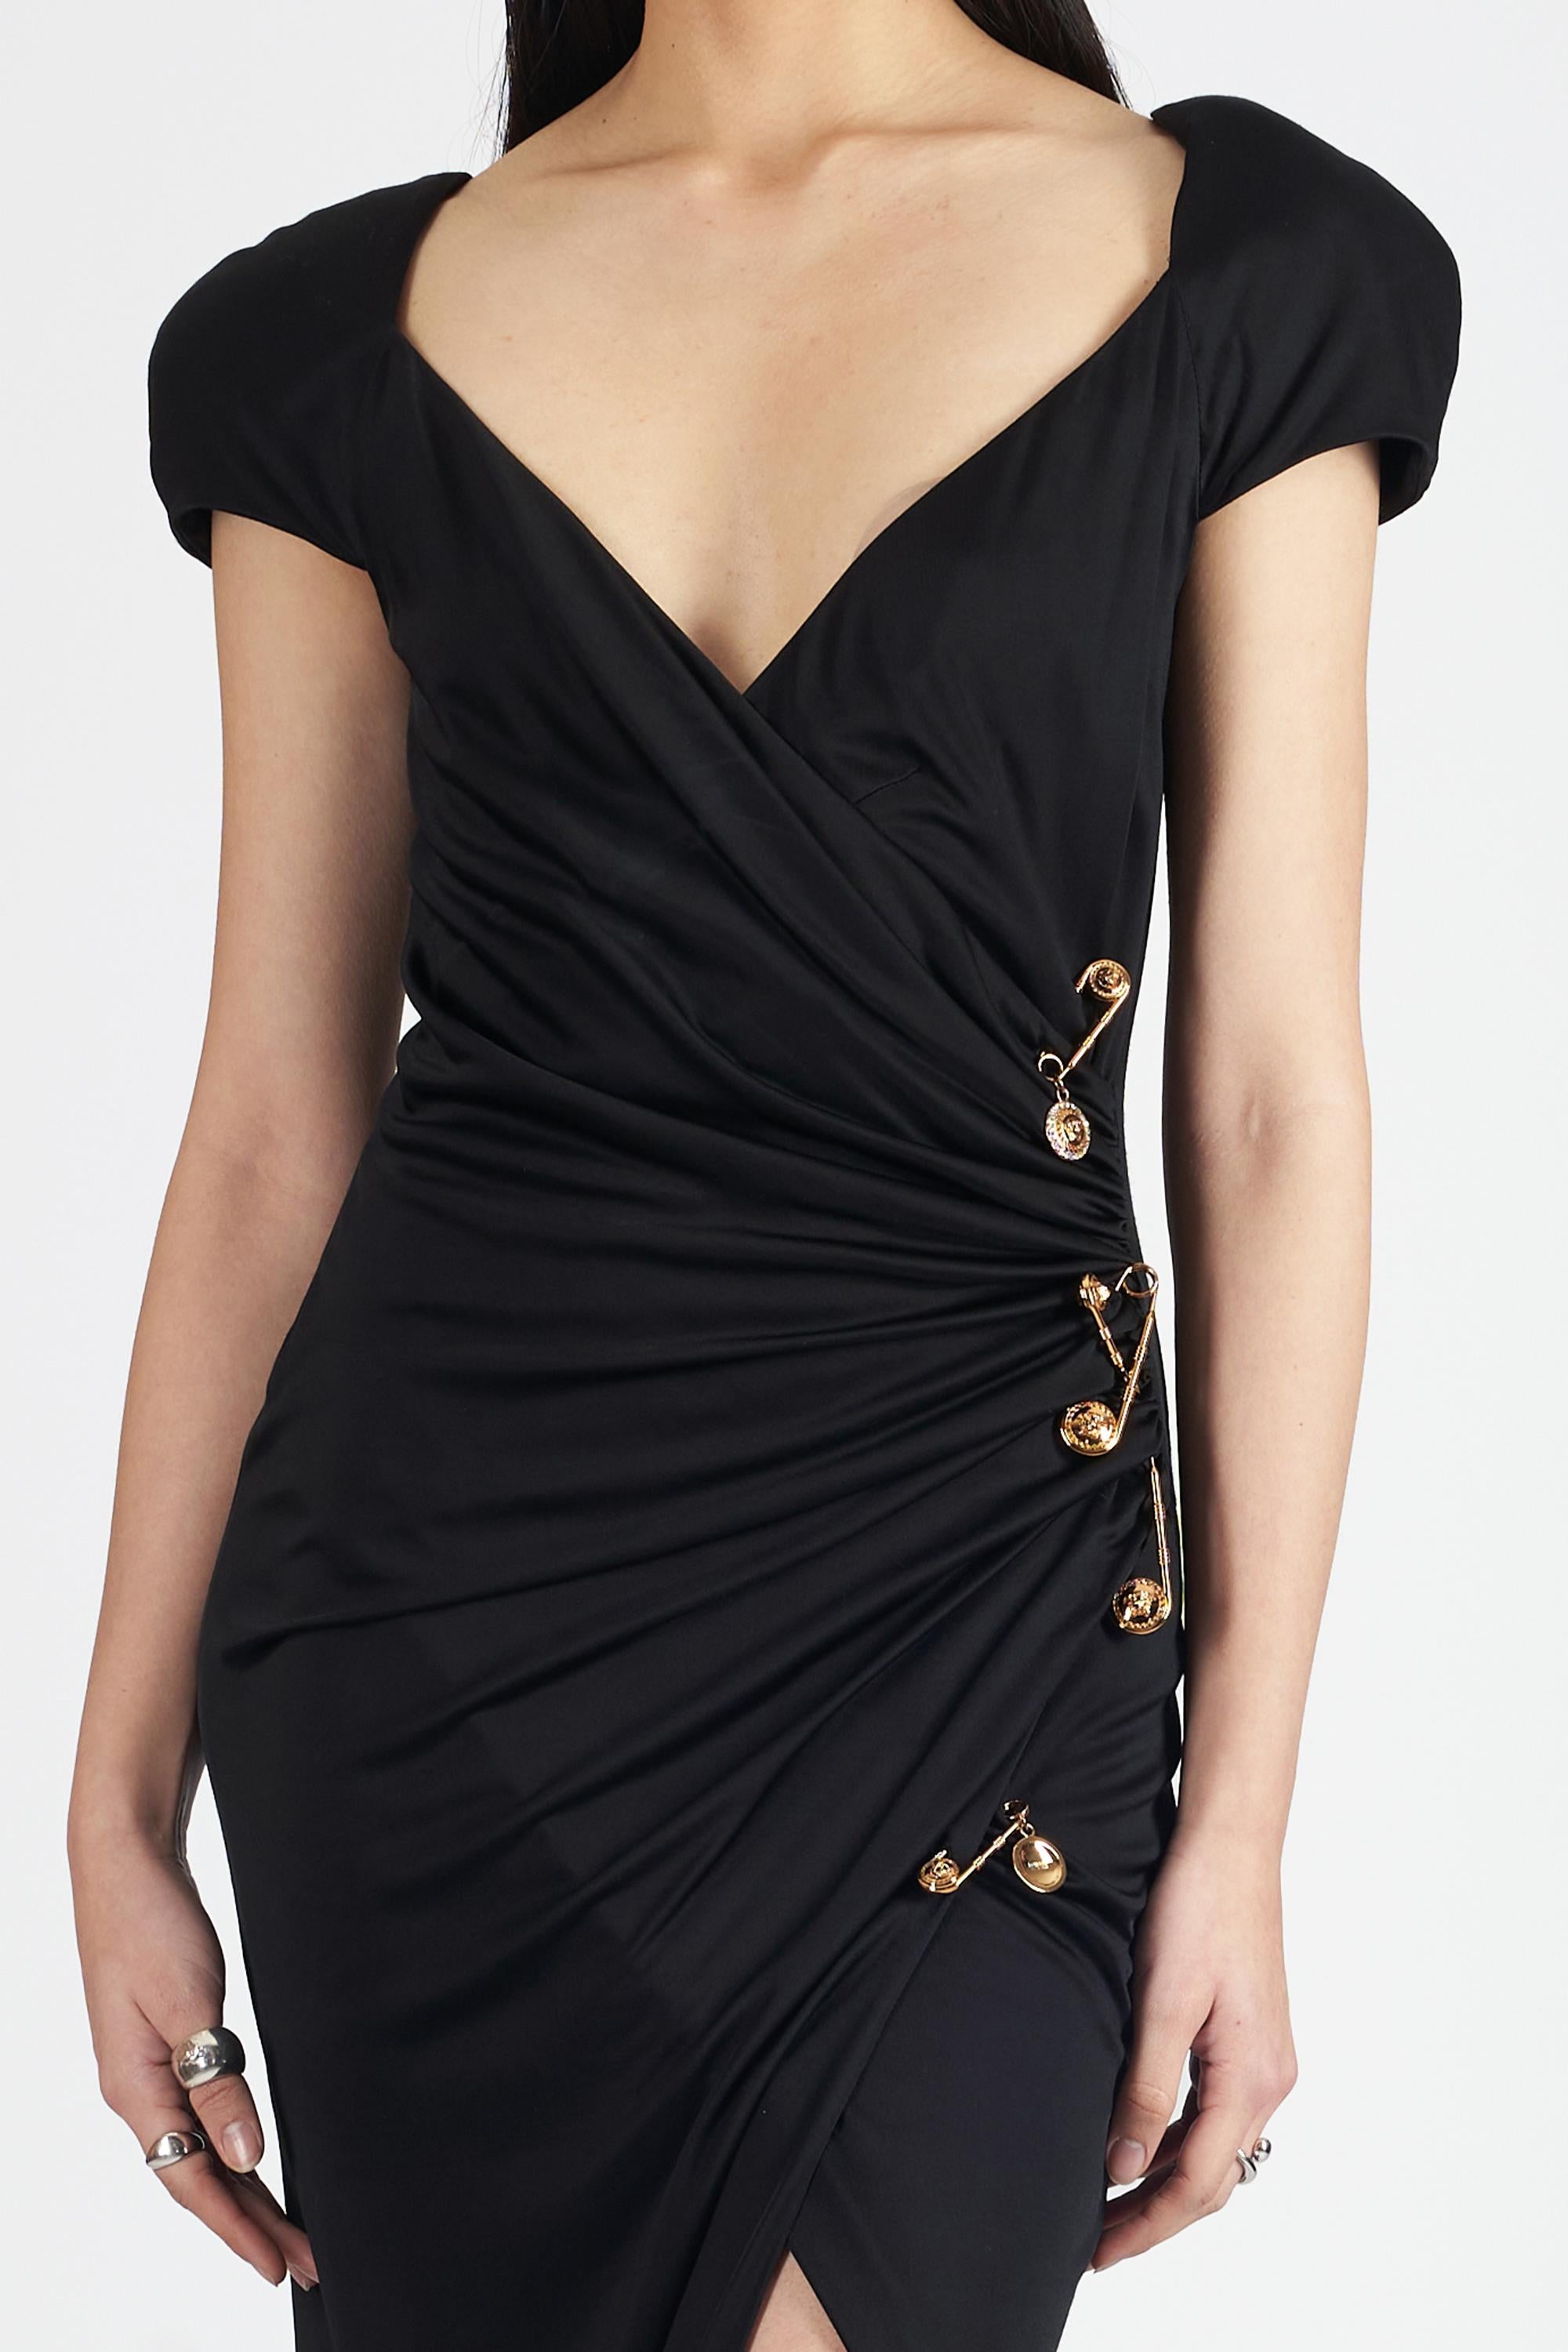 Versace S/S 2021/22 Re-edition of S/S 1994 Safety Pin Dress In New Condition For Sale In London, GB